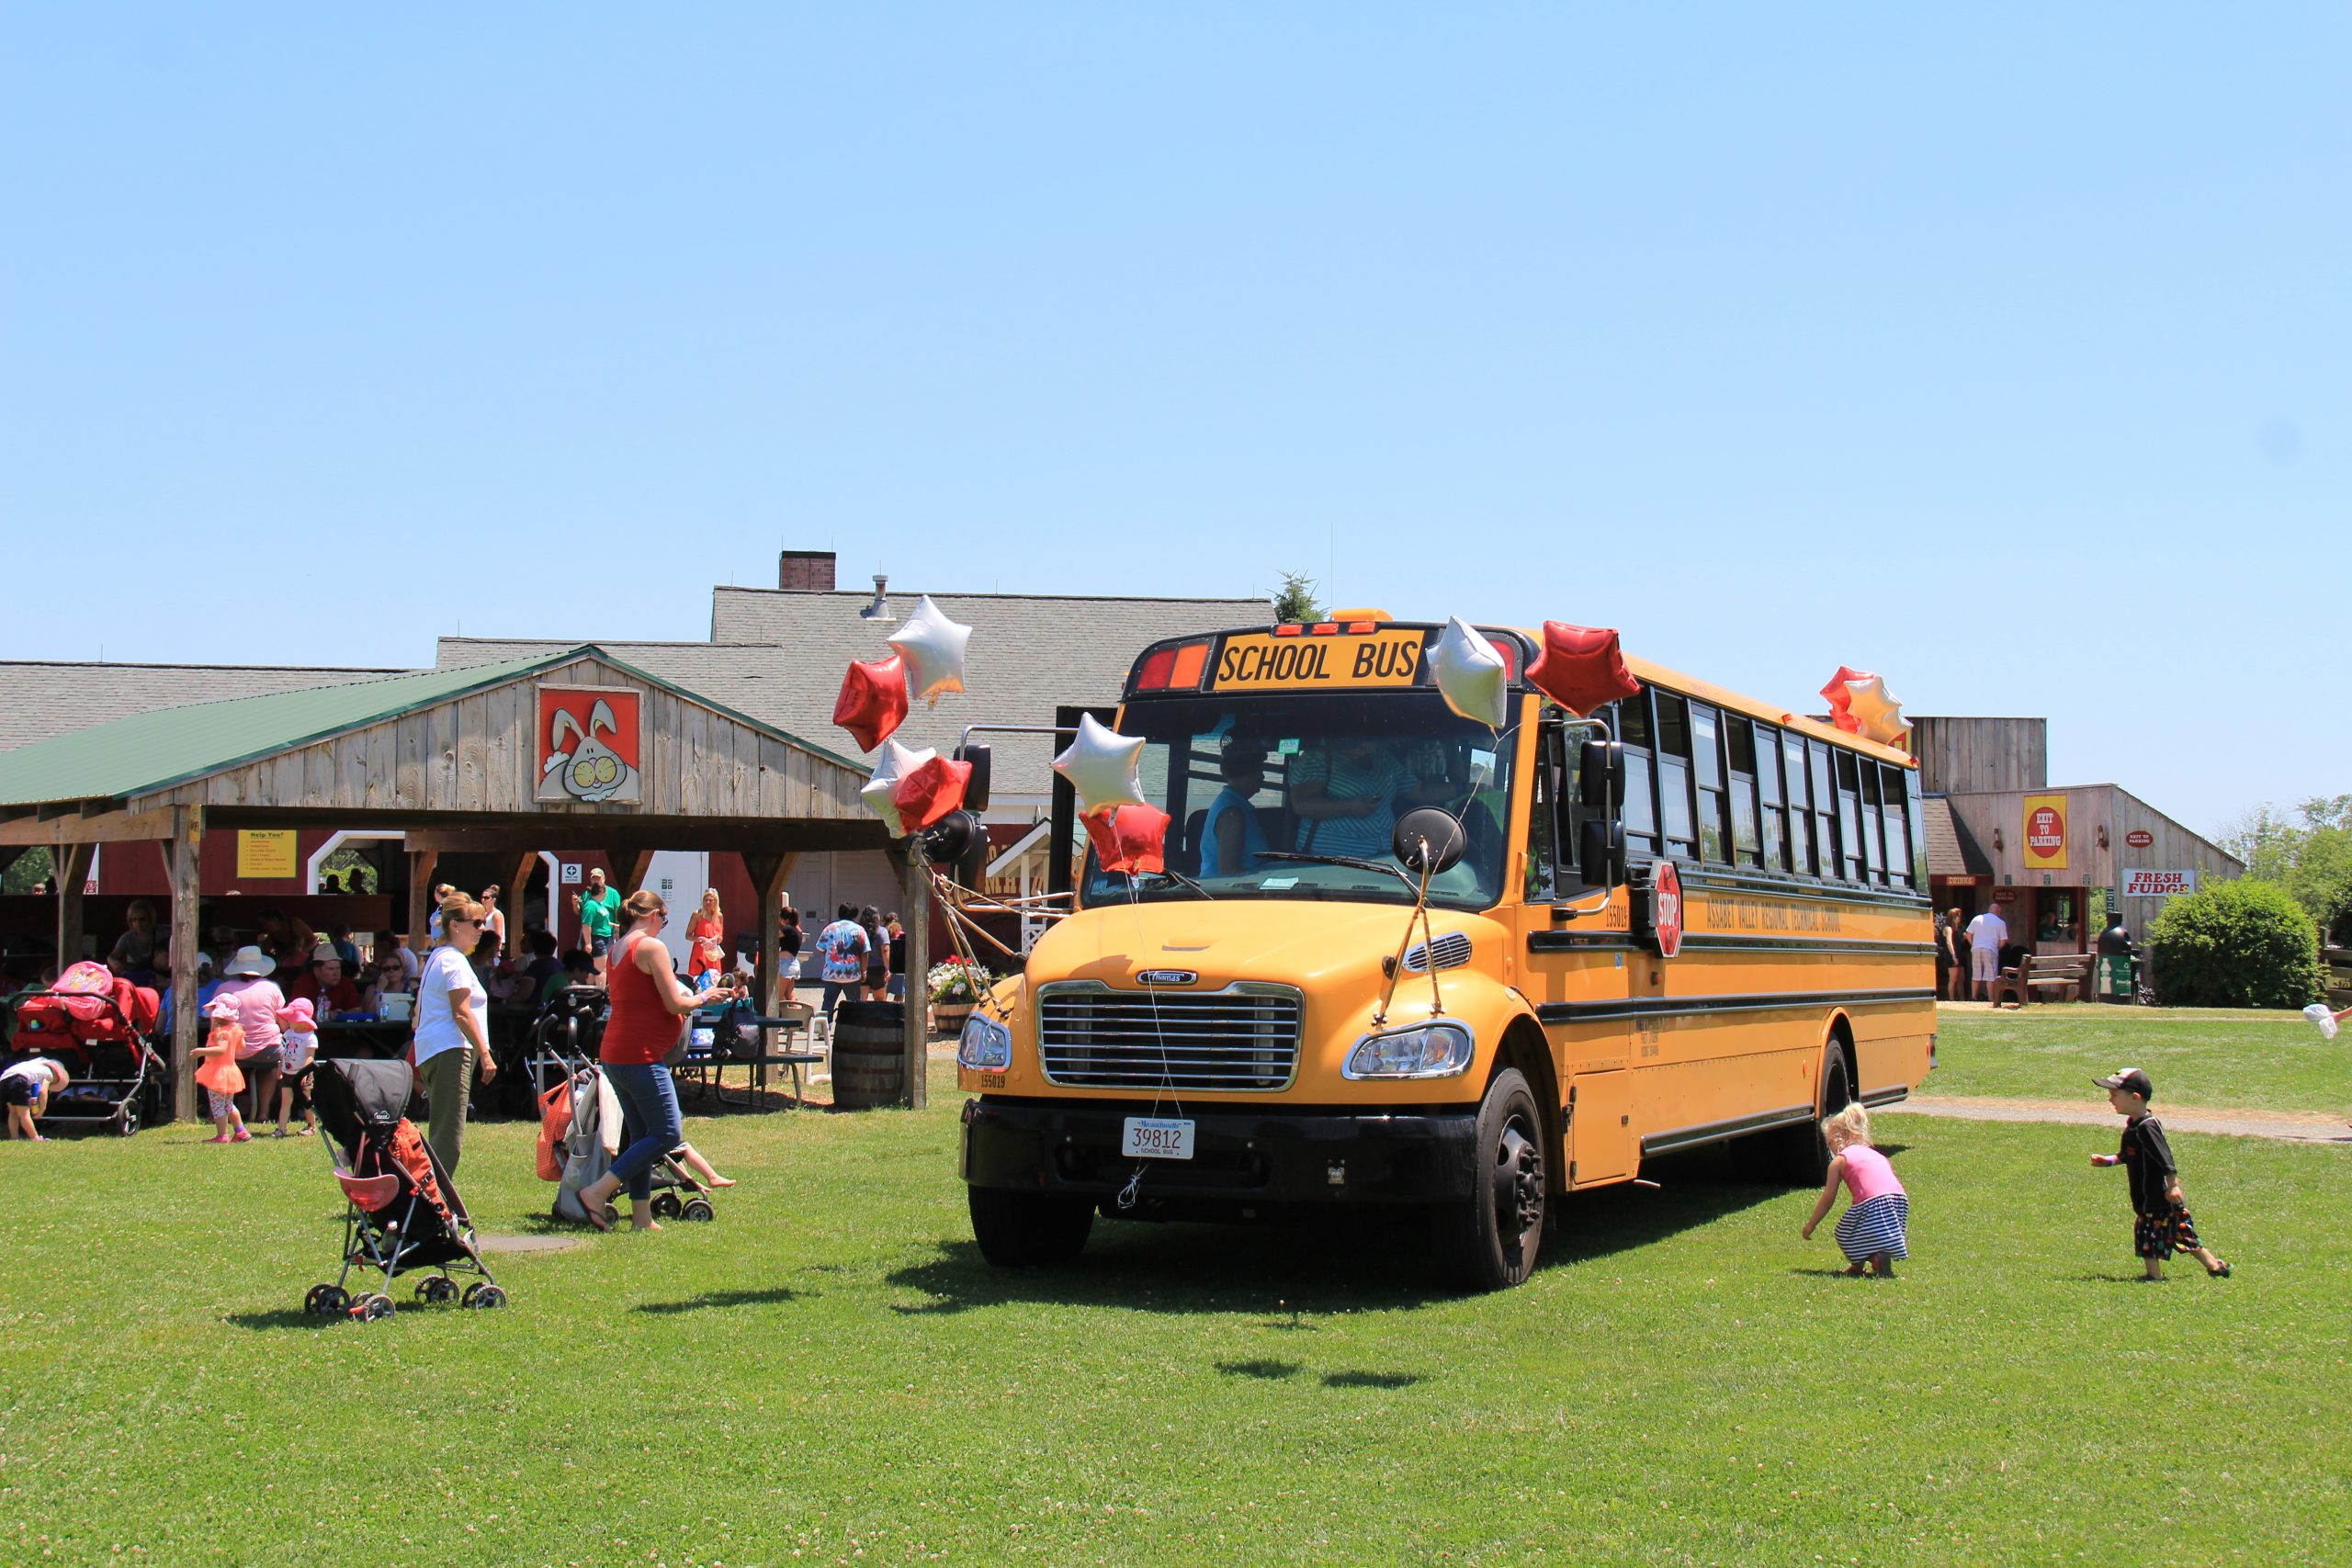 School fieldtrips. Perfect for kids and groups. Tons of fun.